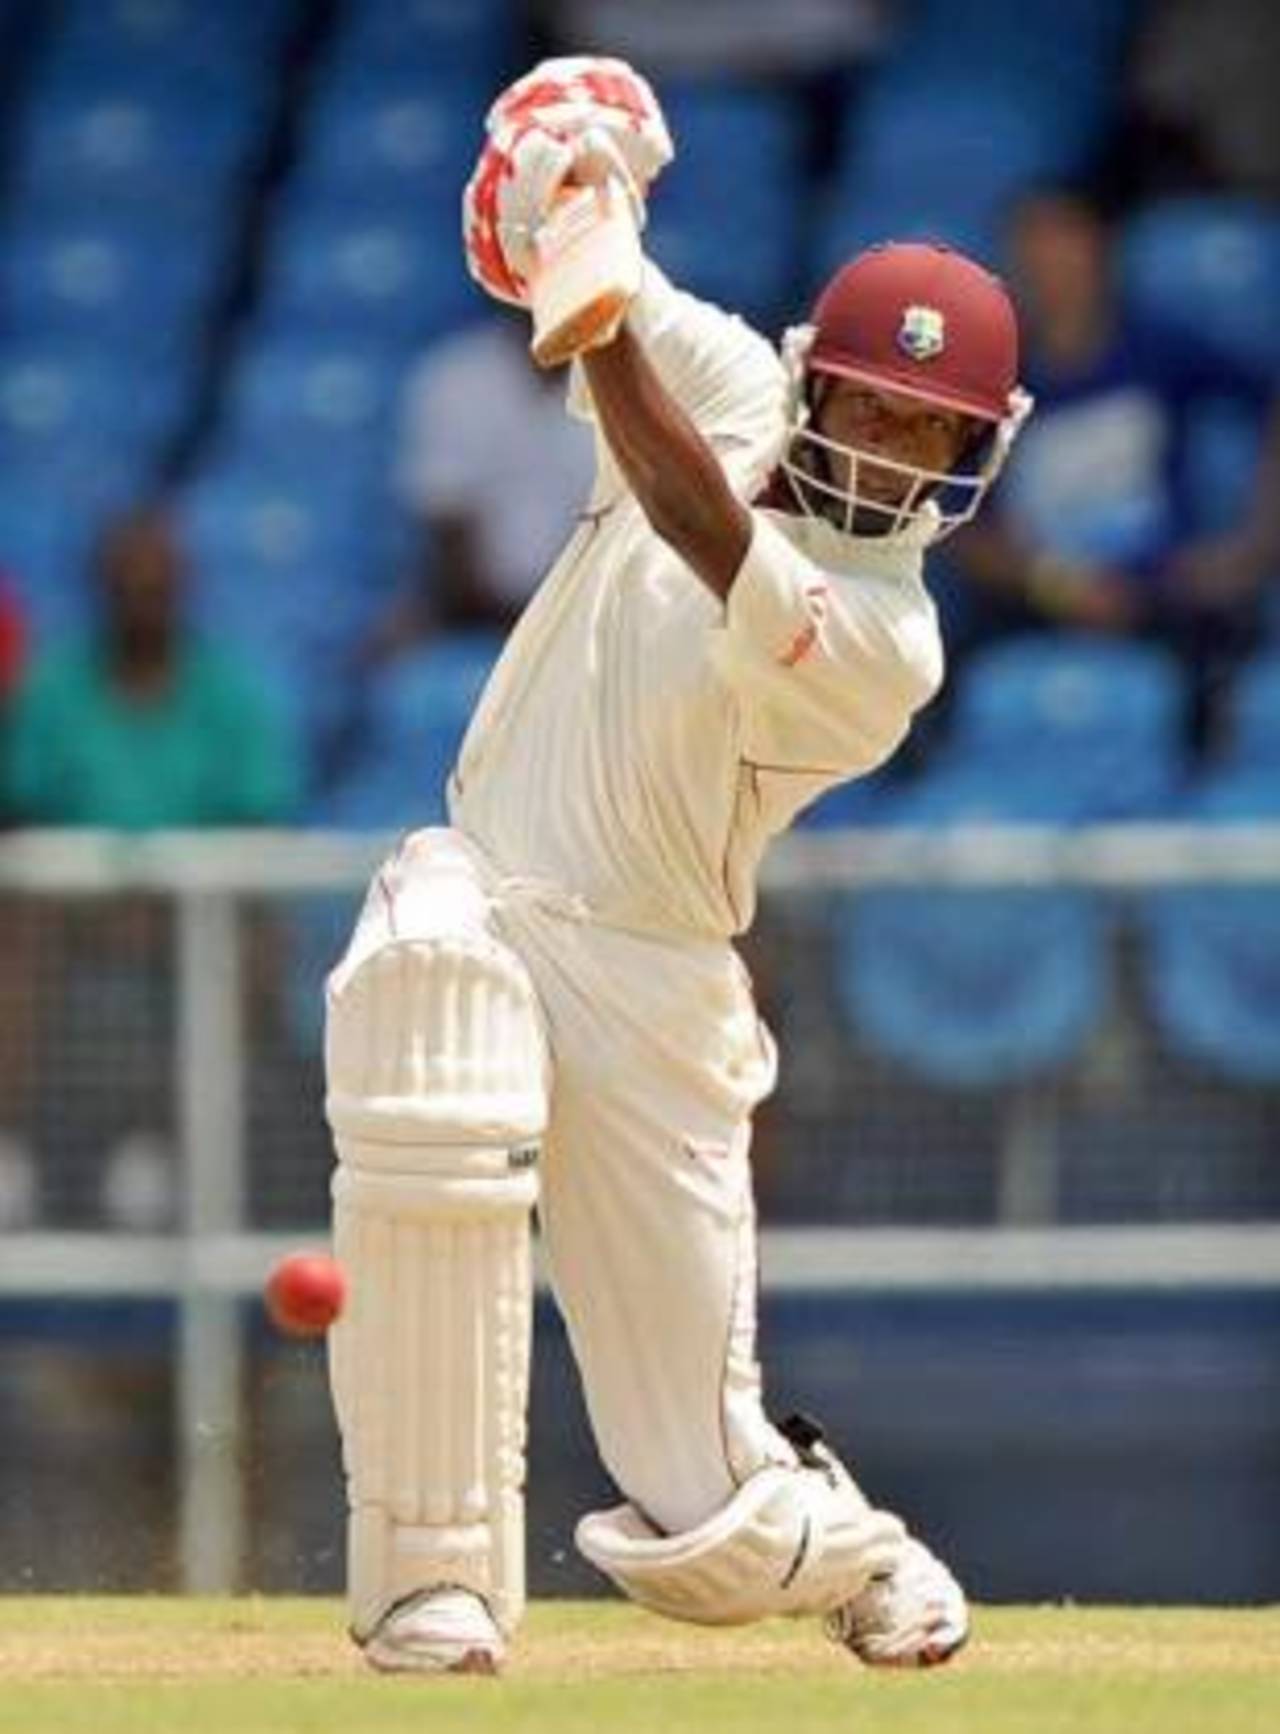 Omar Phillips connects well on a drive, West Indies v Bangladesh, 1st Test, Kingstown, 3rd day, July 11, 2009